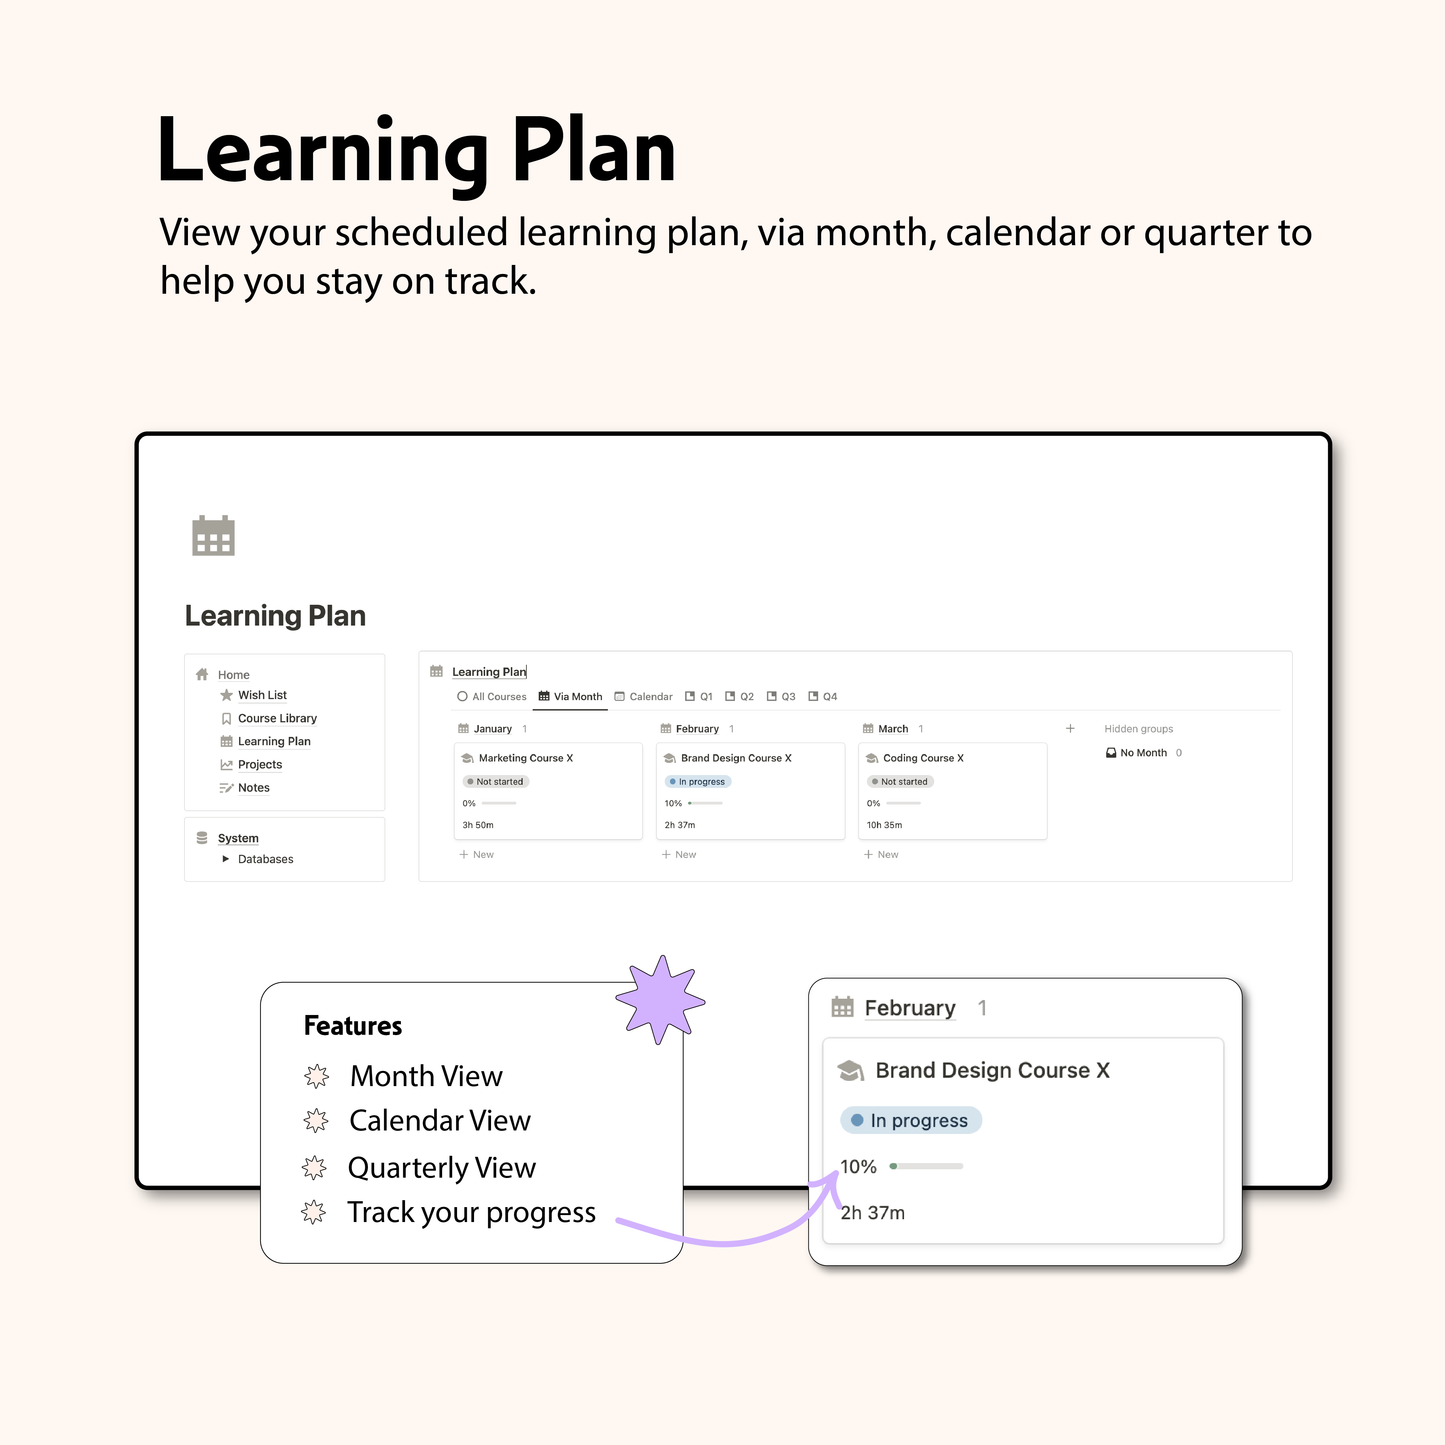 Self Learning Education PLanner Notion Template